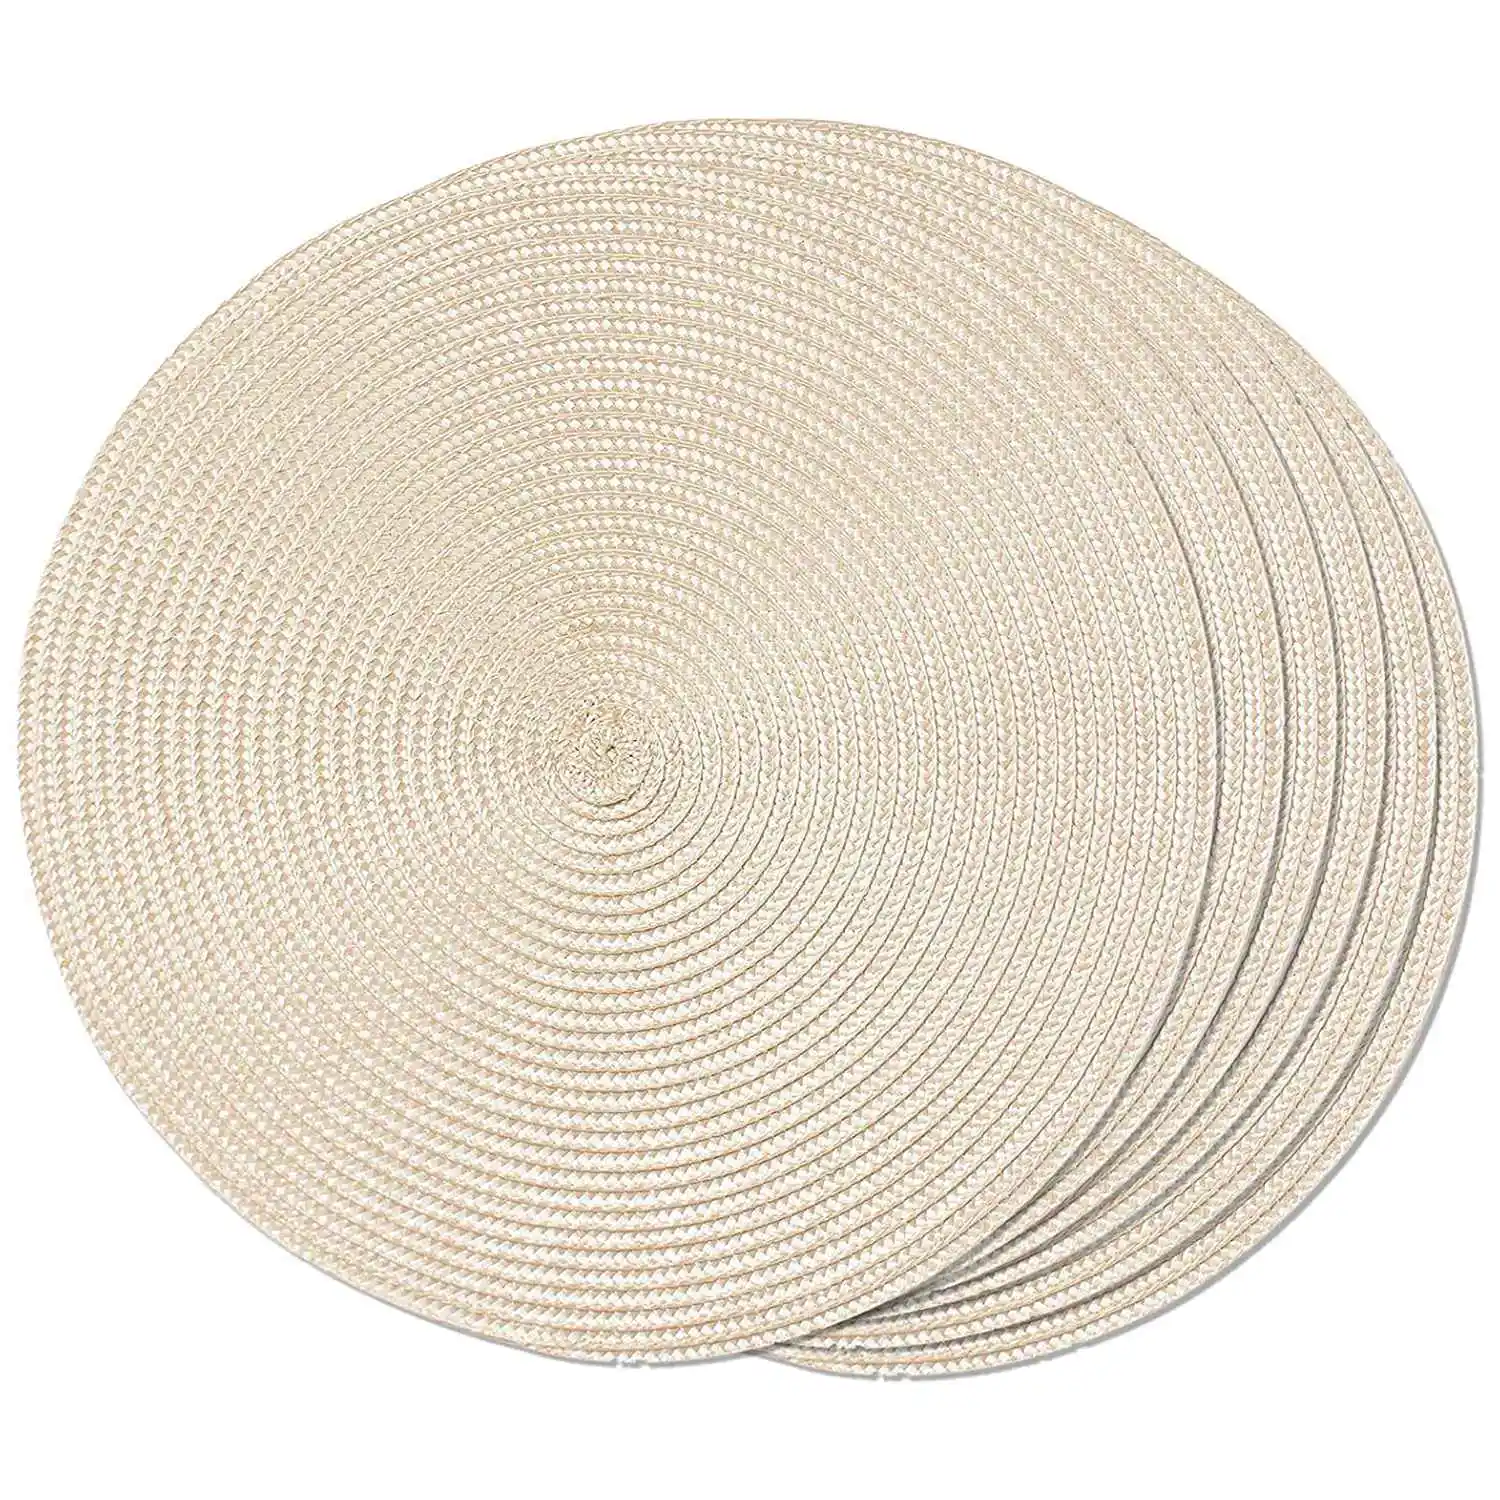 

Round Braided Placemats Set of 6 Table Mats for Dining Tables Woven Washable Non-Slip Place Mats 15 Inch(Beige)